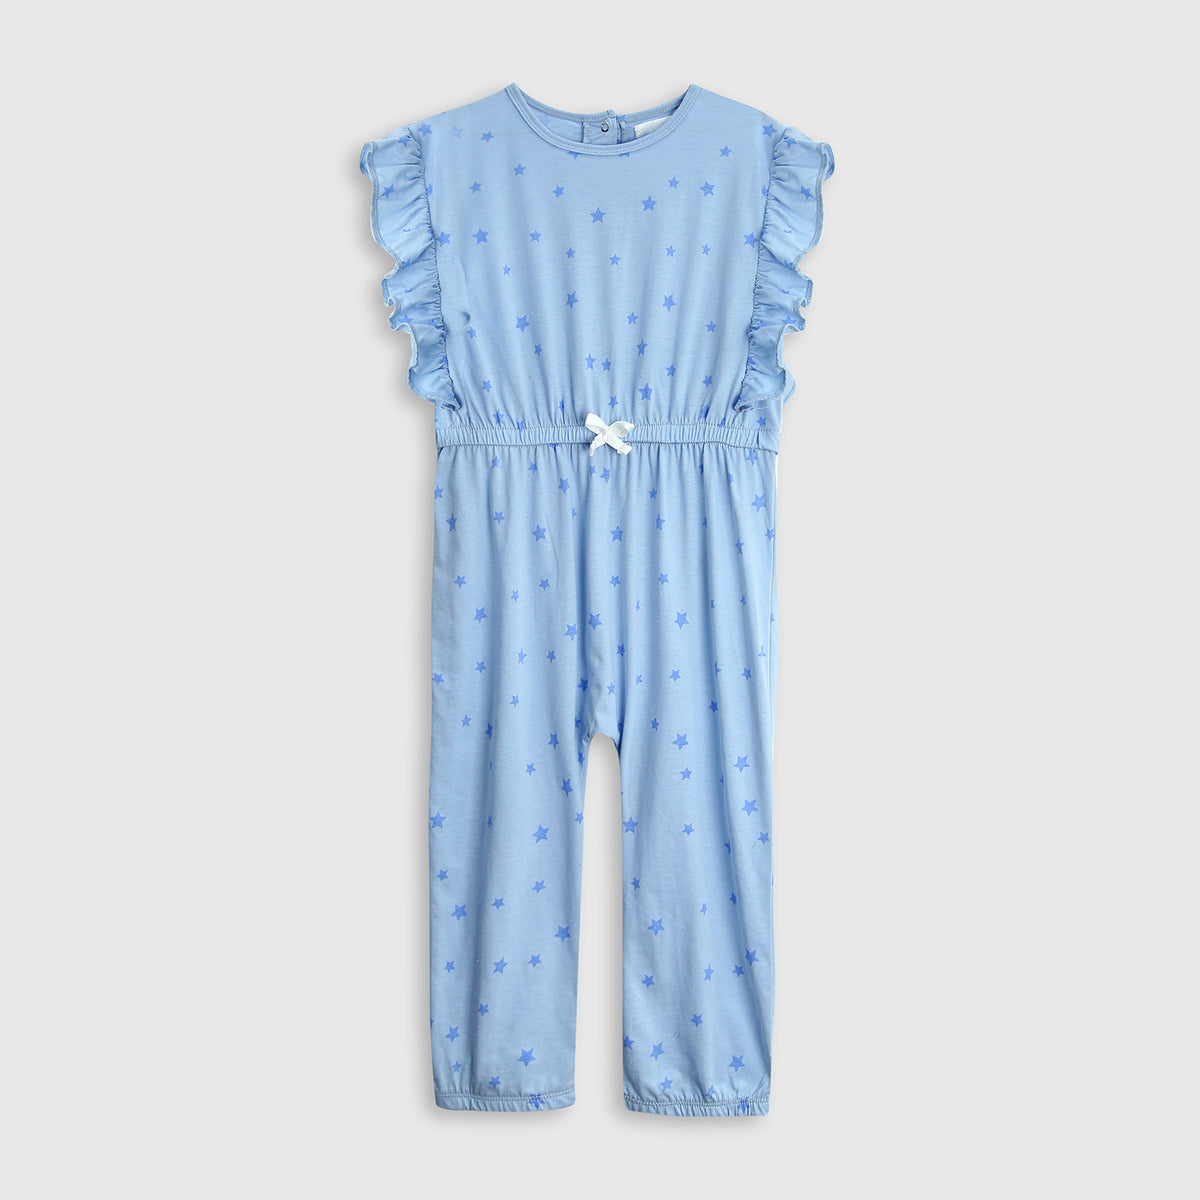 Girls Fashion All Over Printed Soft Cotton Frill Jumpsuit